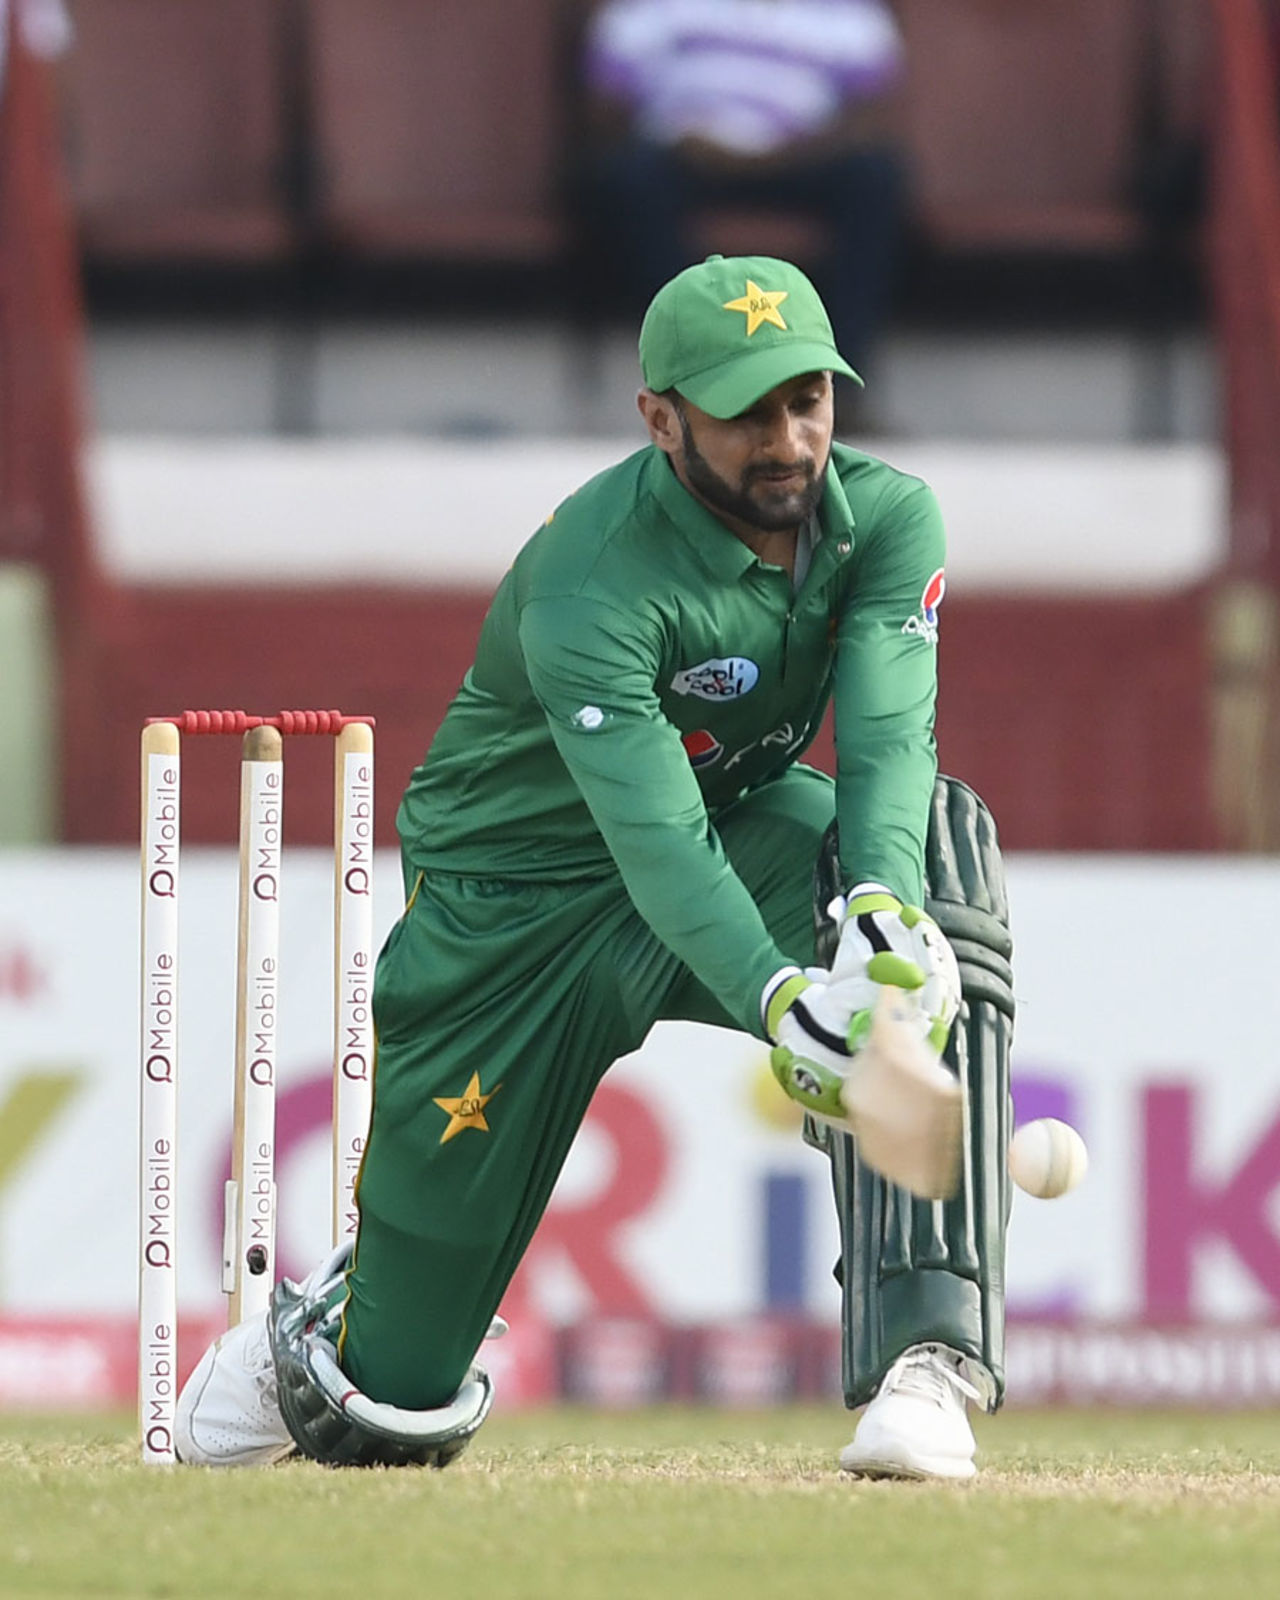 Shoaib Malik played a very responsible innings, West Indies v Pakistan, 3rd ODI, Providence, April 11, 2017